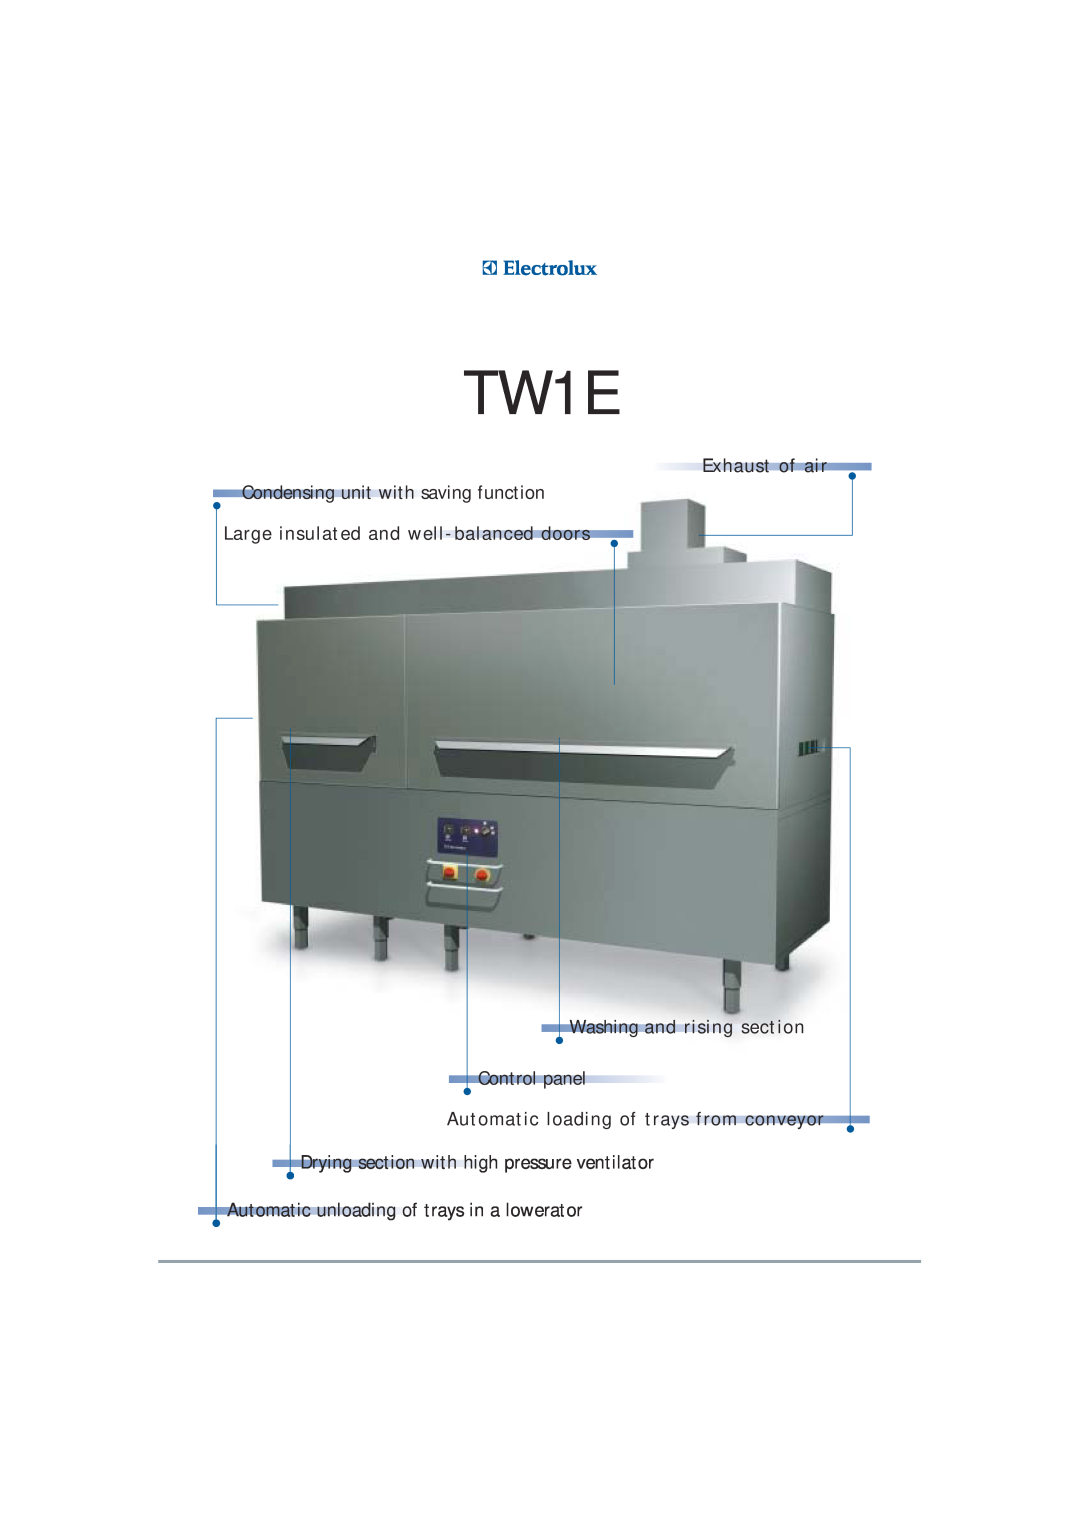 Electrolux TW1E Exhaustofair Condensingunitwithsaving function, Controlpanel, Automaticunloadingof trays in a lowerator 